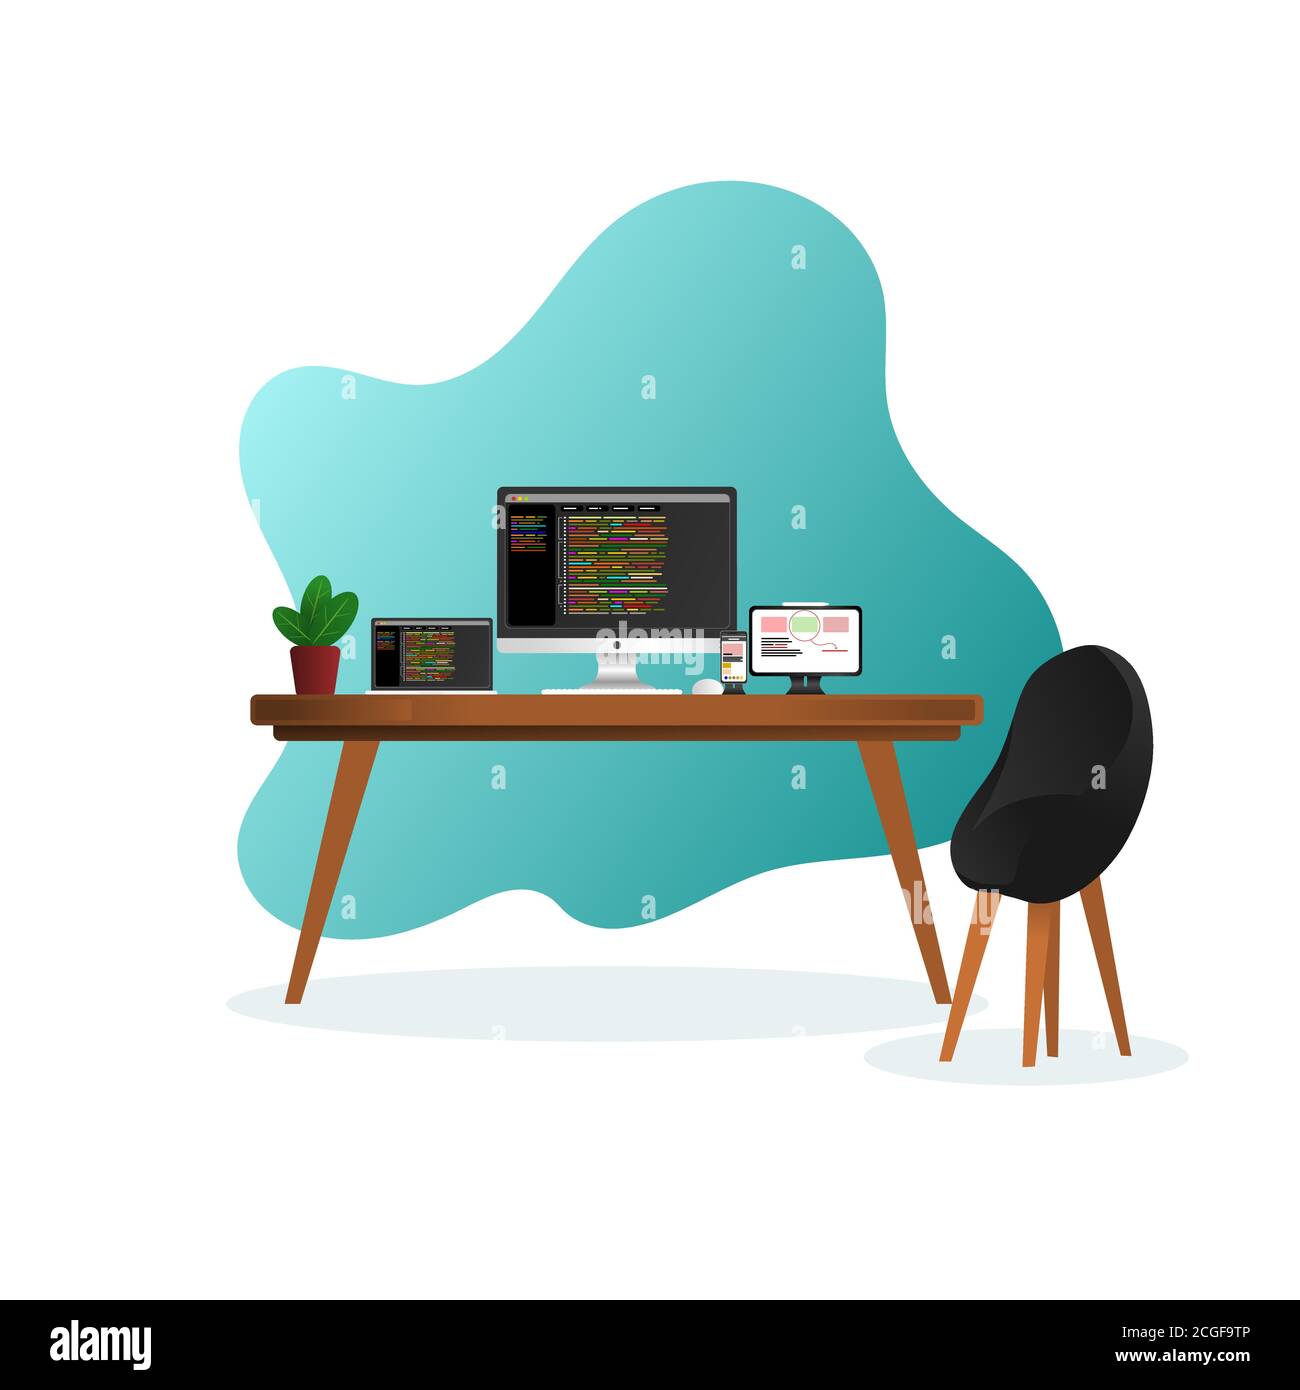 Programmer desktop illustration vector, flat design and minimalist, additional image include layer by layer Stock Vector